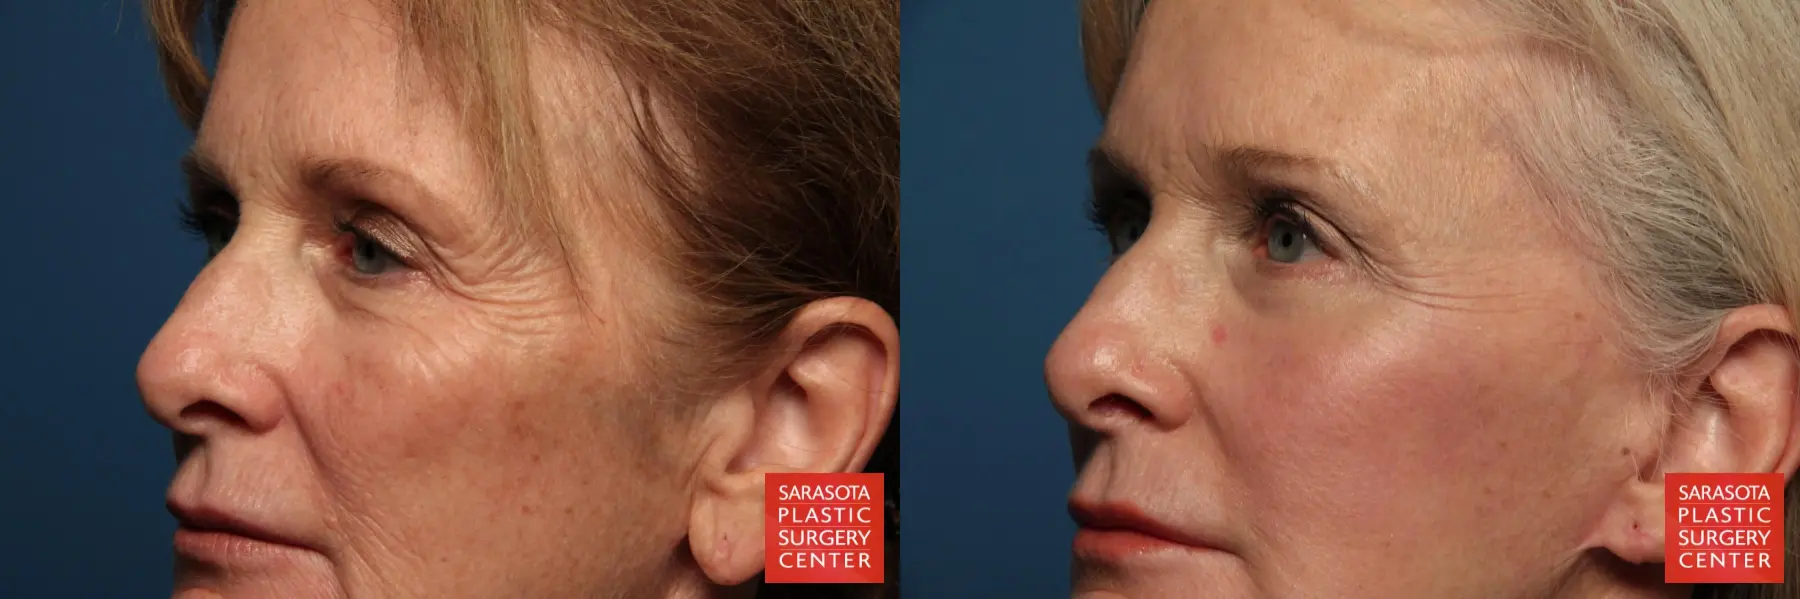 Eyelid Lift: Patient 3 - Before and After 2